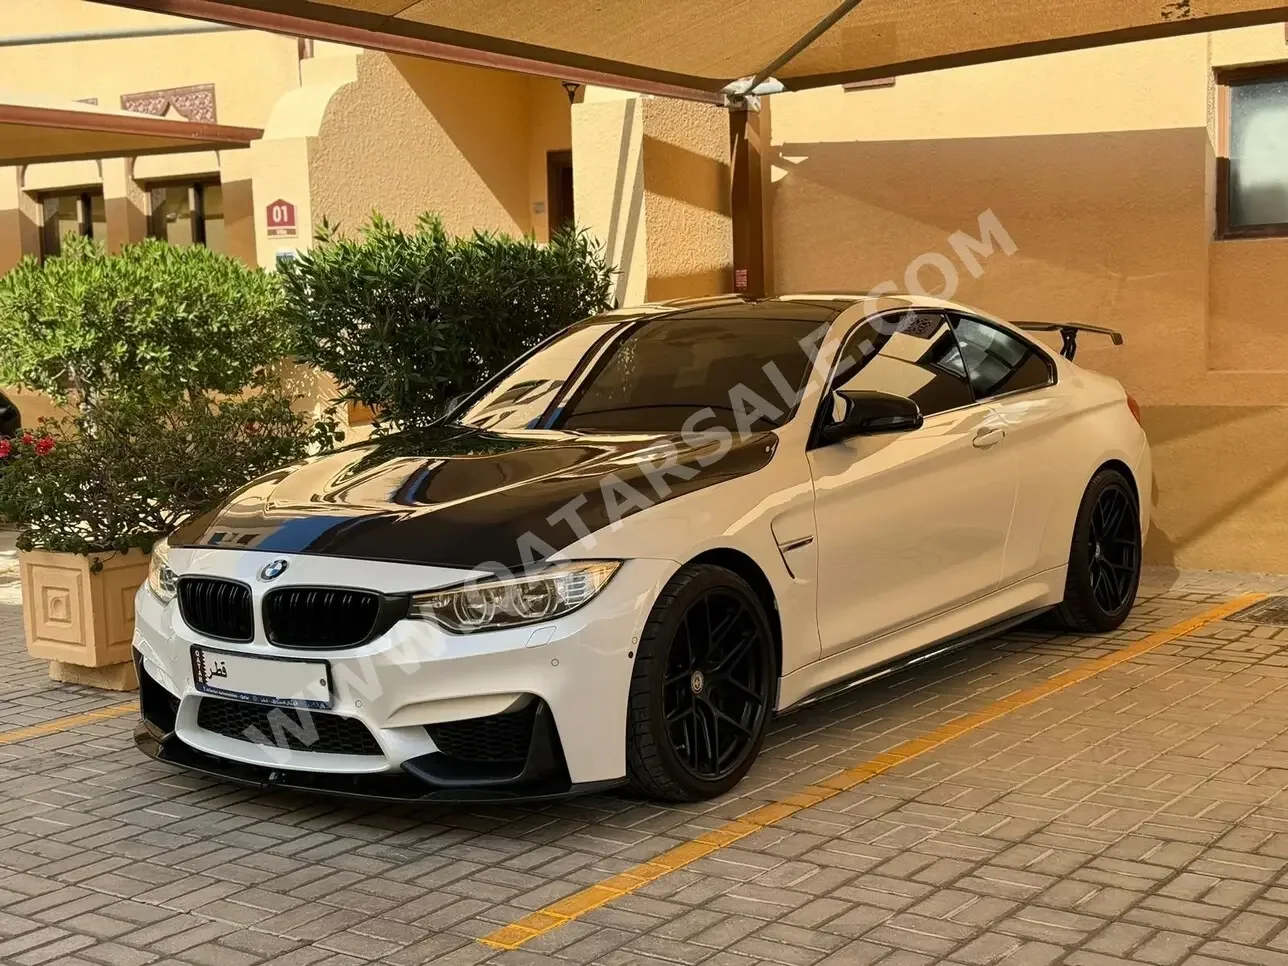 BMW  M-Series  4  2016  Automatic  139,000 Km  6 Cylinder  Rear Wheel Drive (RWD)  Coupe / Sport  White